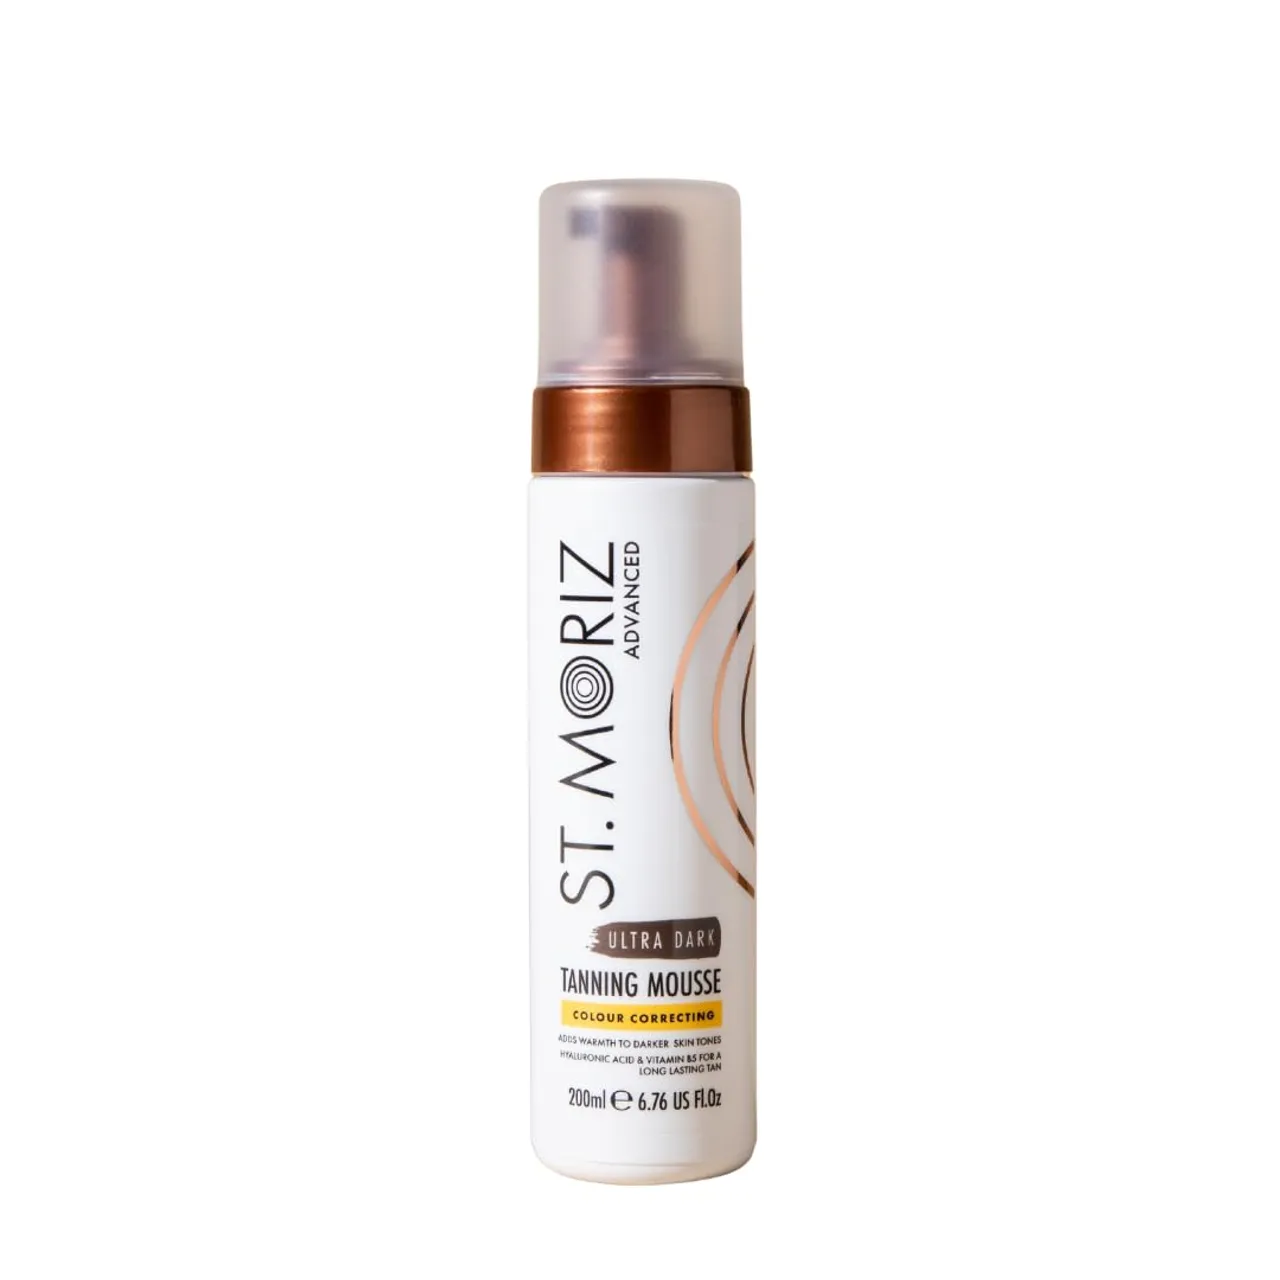 St Moriz Advanced Colour Correcting Tanning Mousse in Ultra